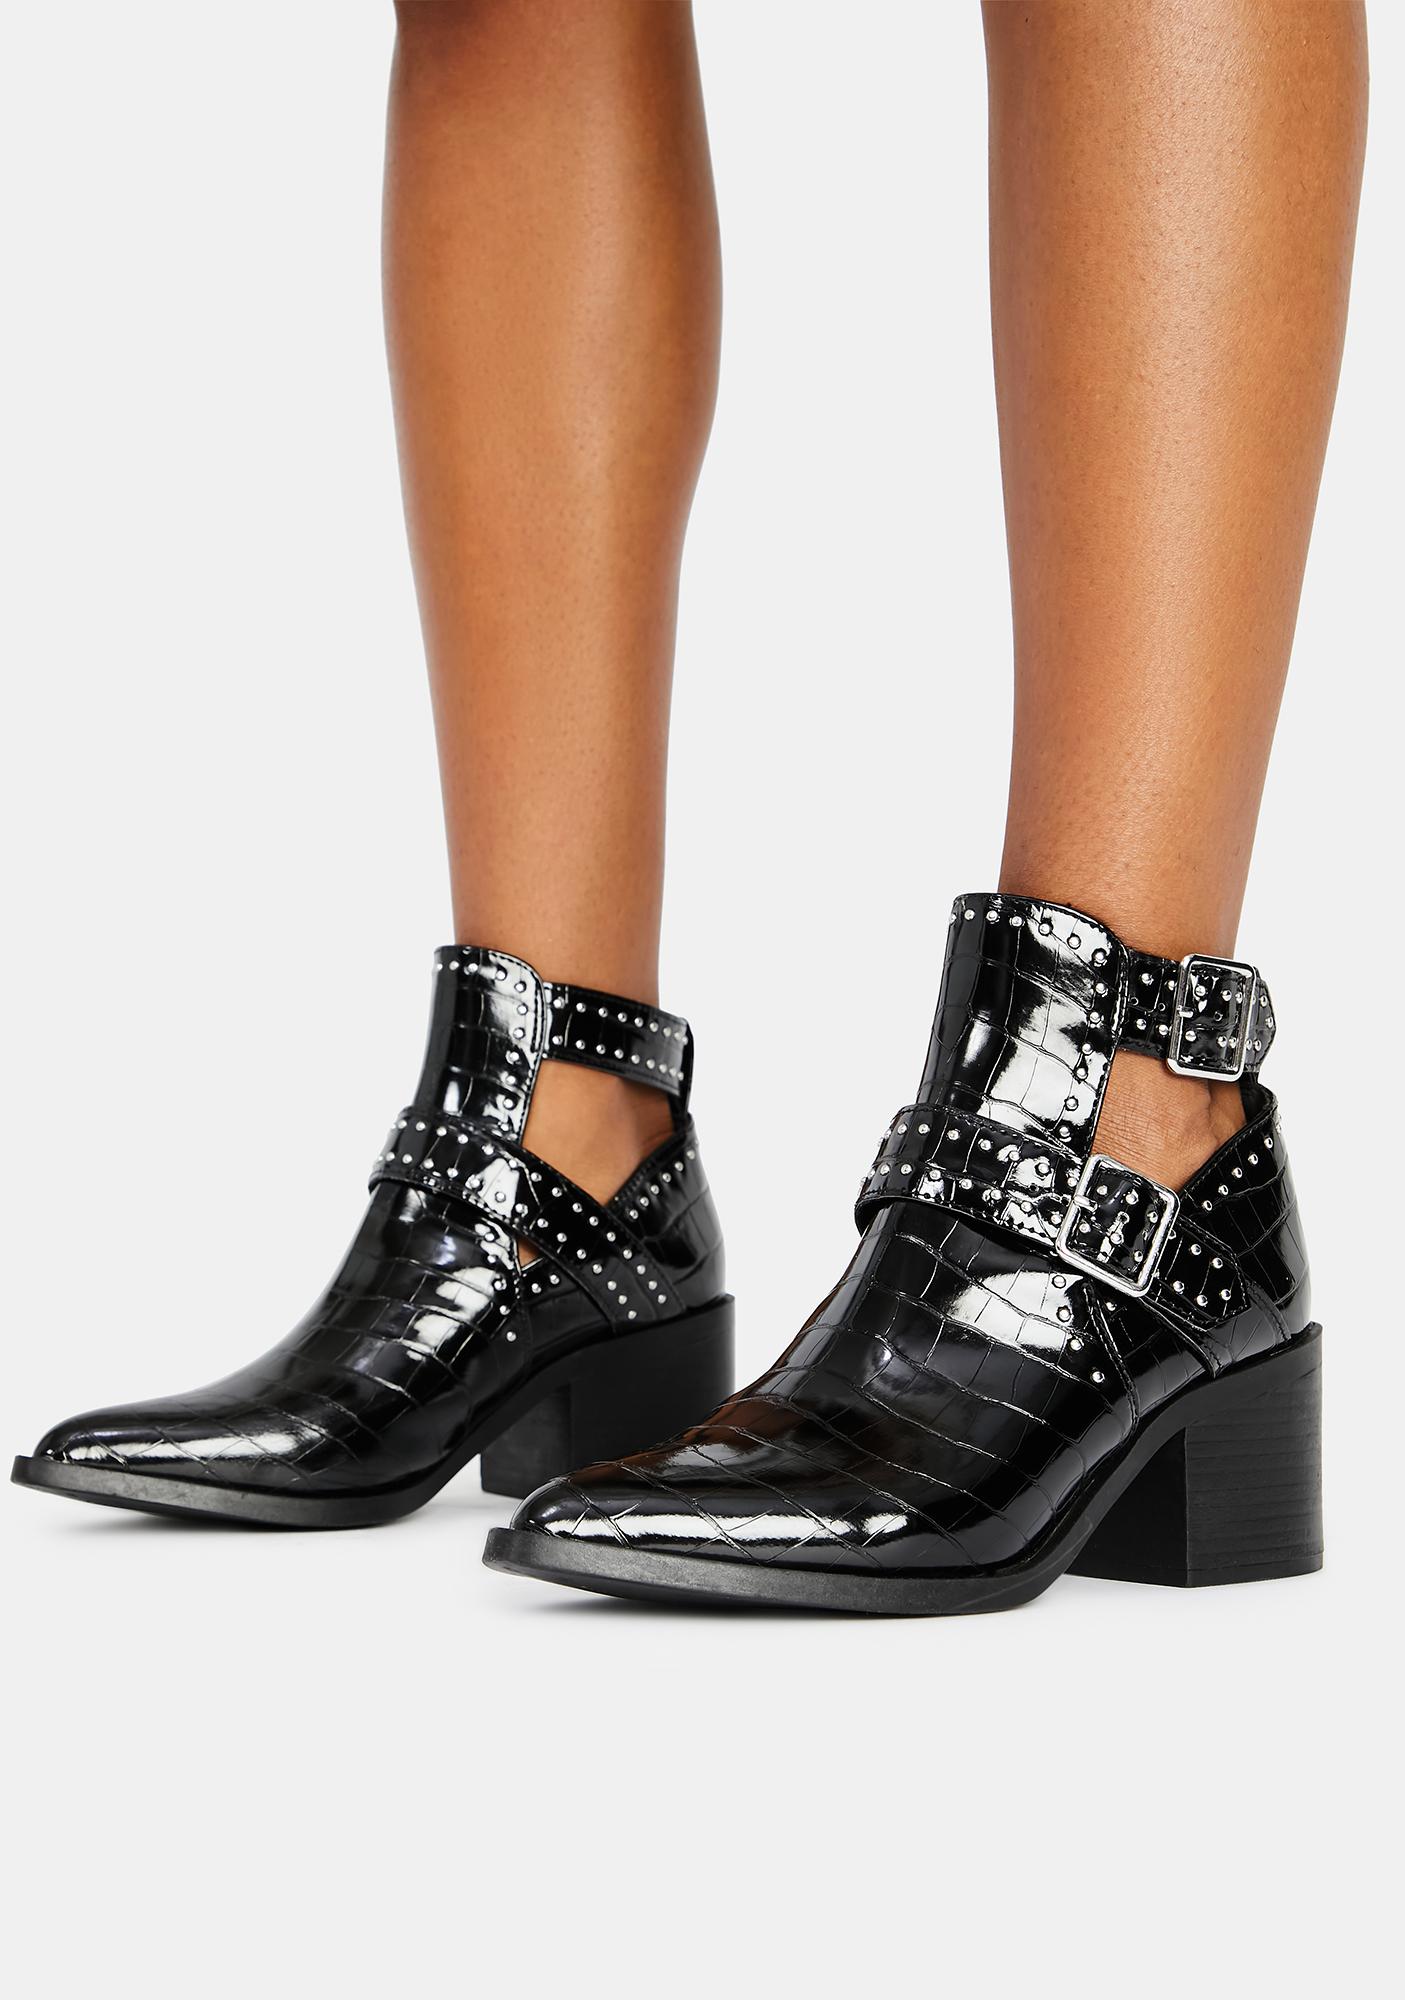 rasguño charla Canal Steve Madden Black Booties With Buckles Latvia, SAVE 60% - aveclumiere.com